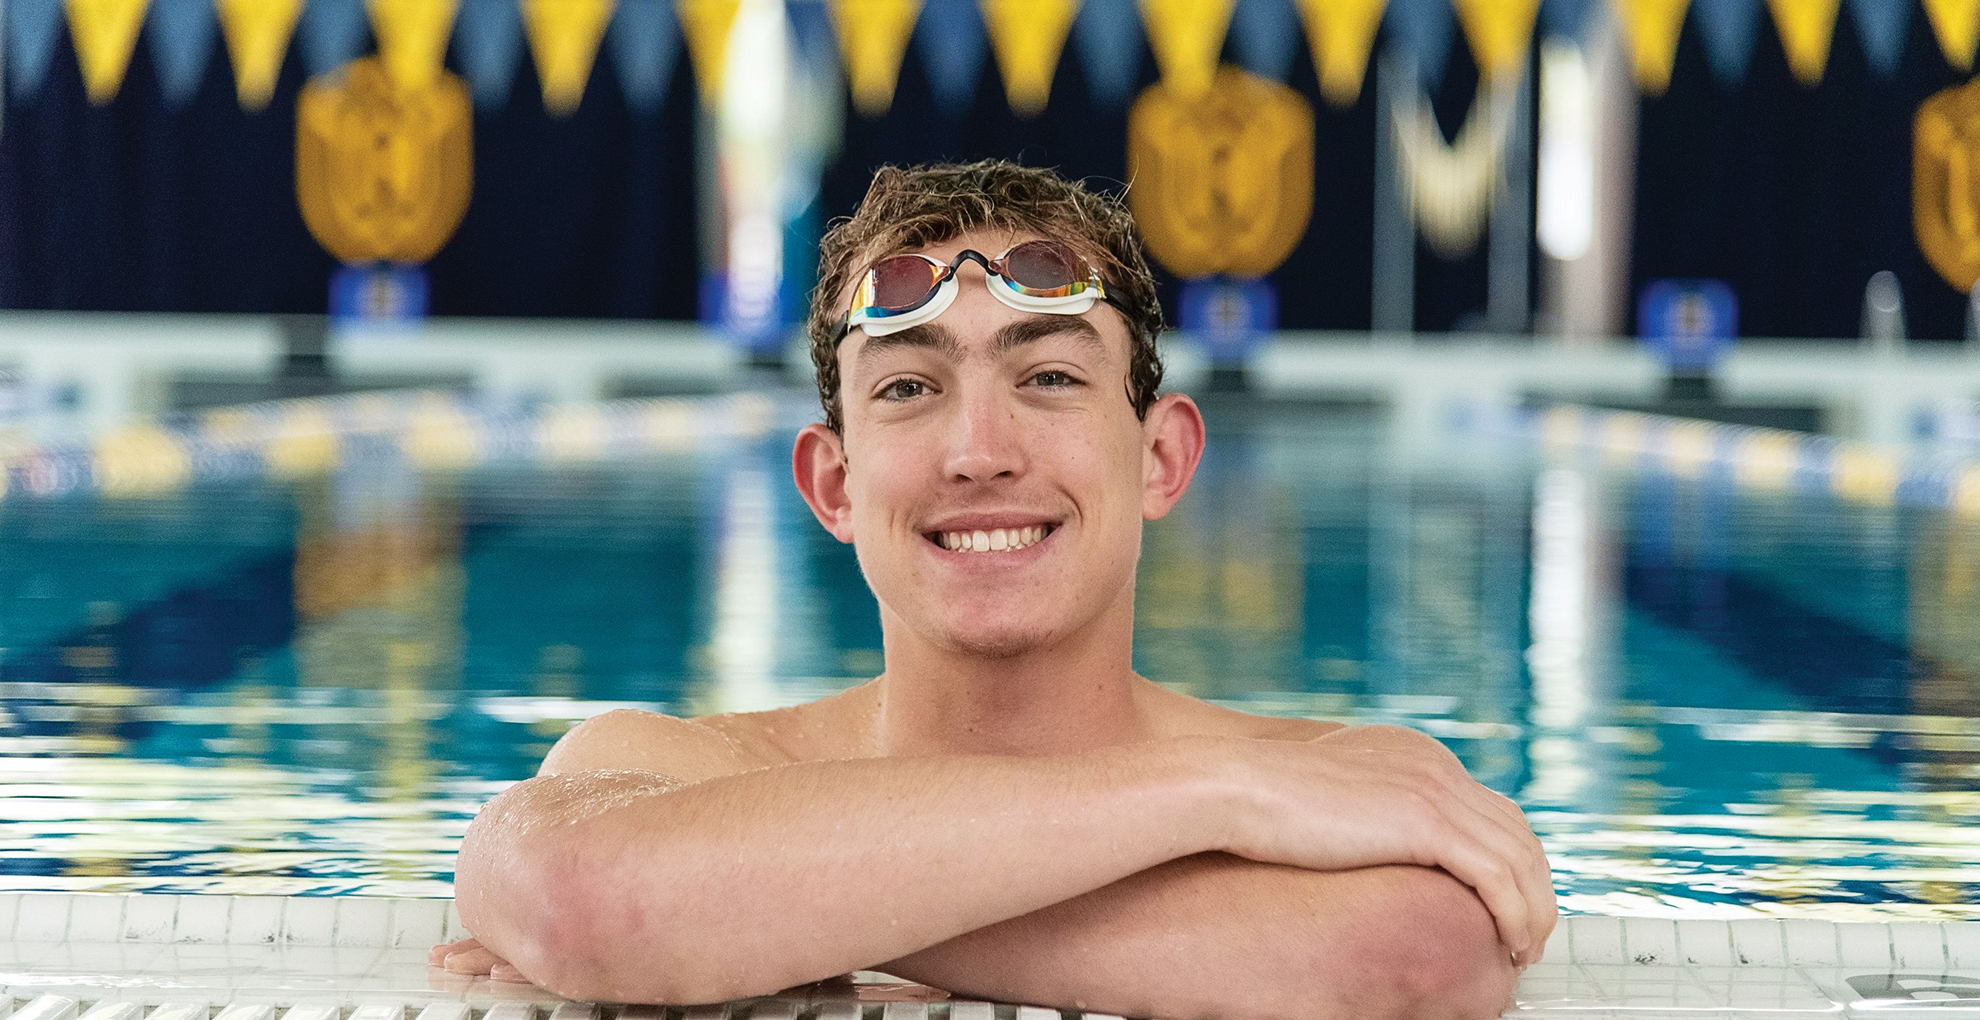 Tanner Filion ’23 smiling in the pool.